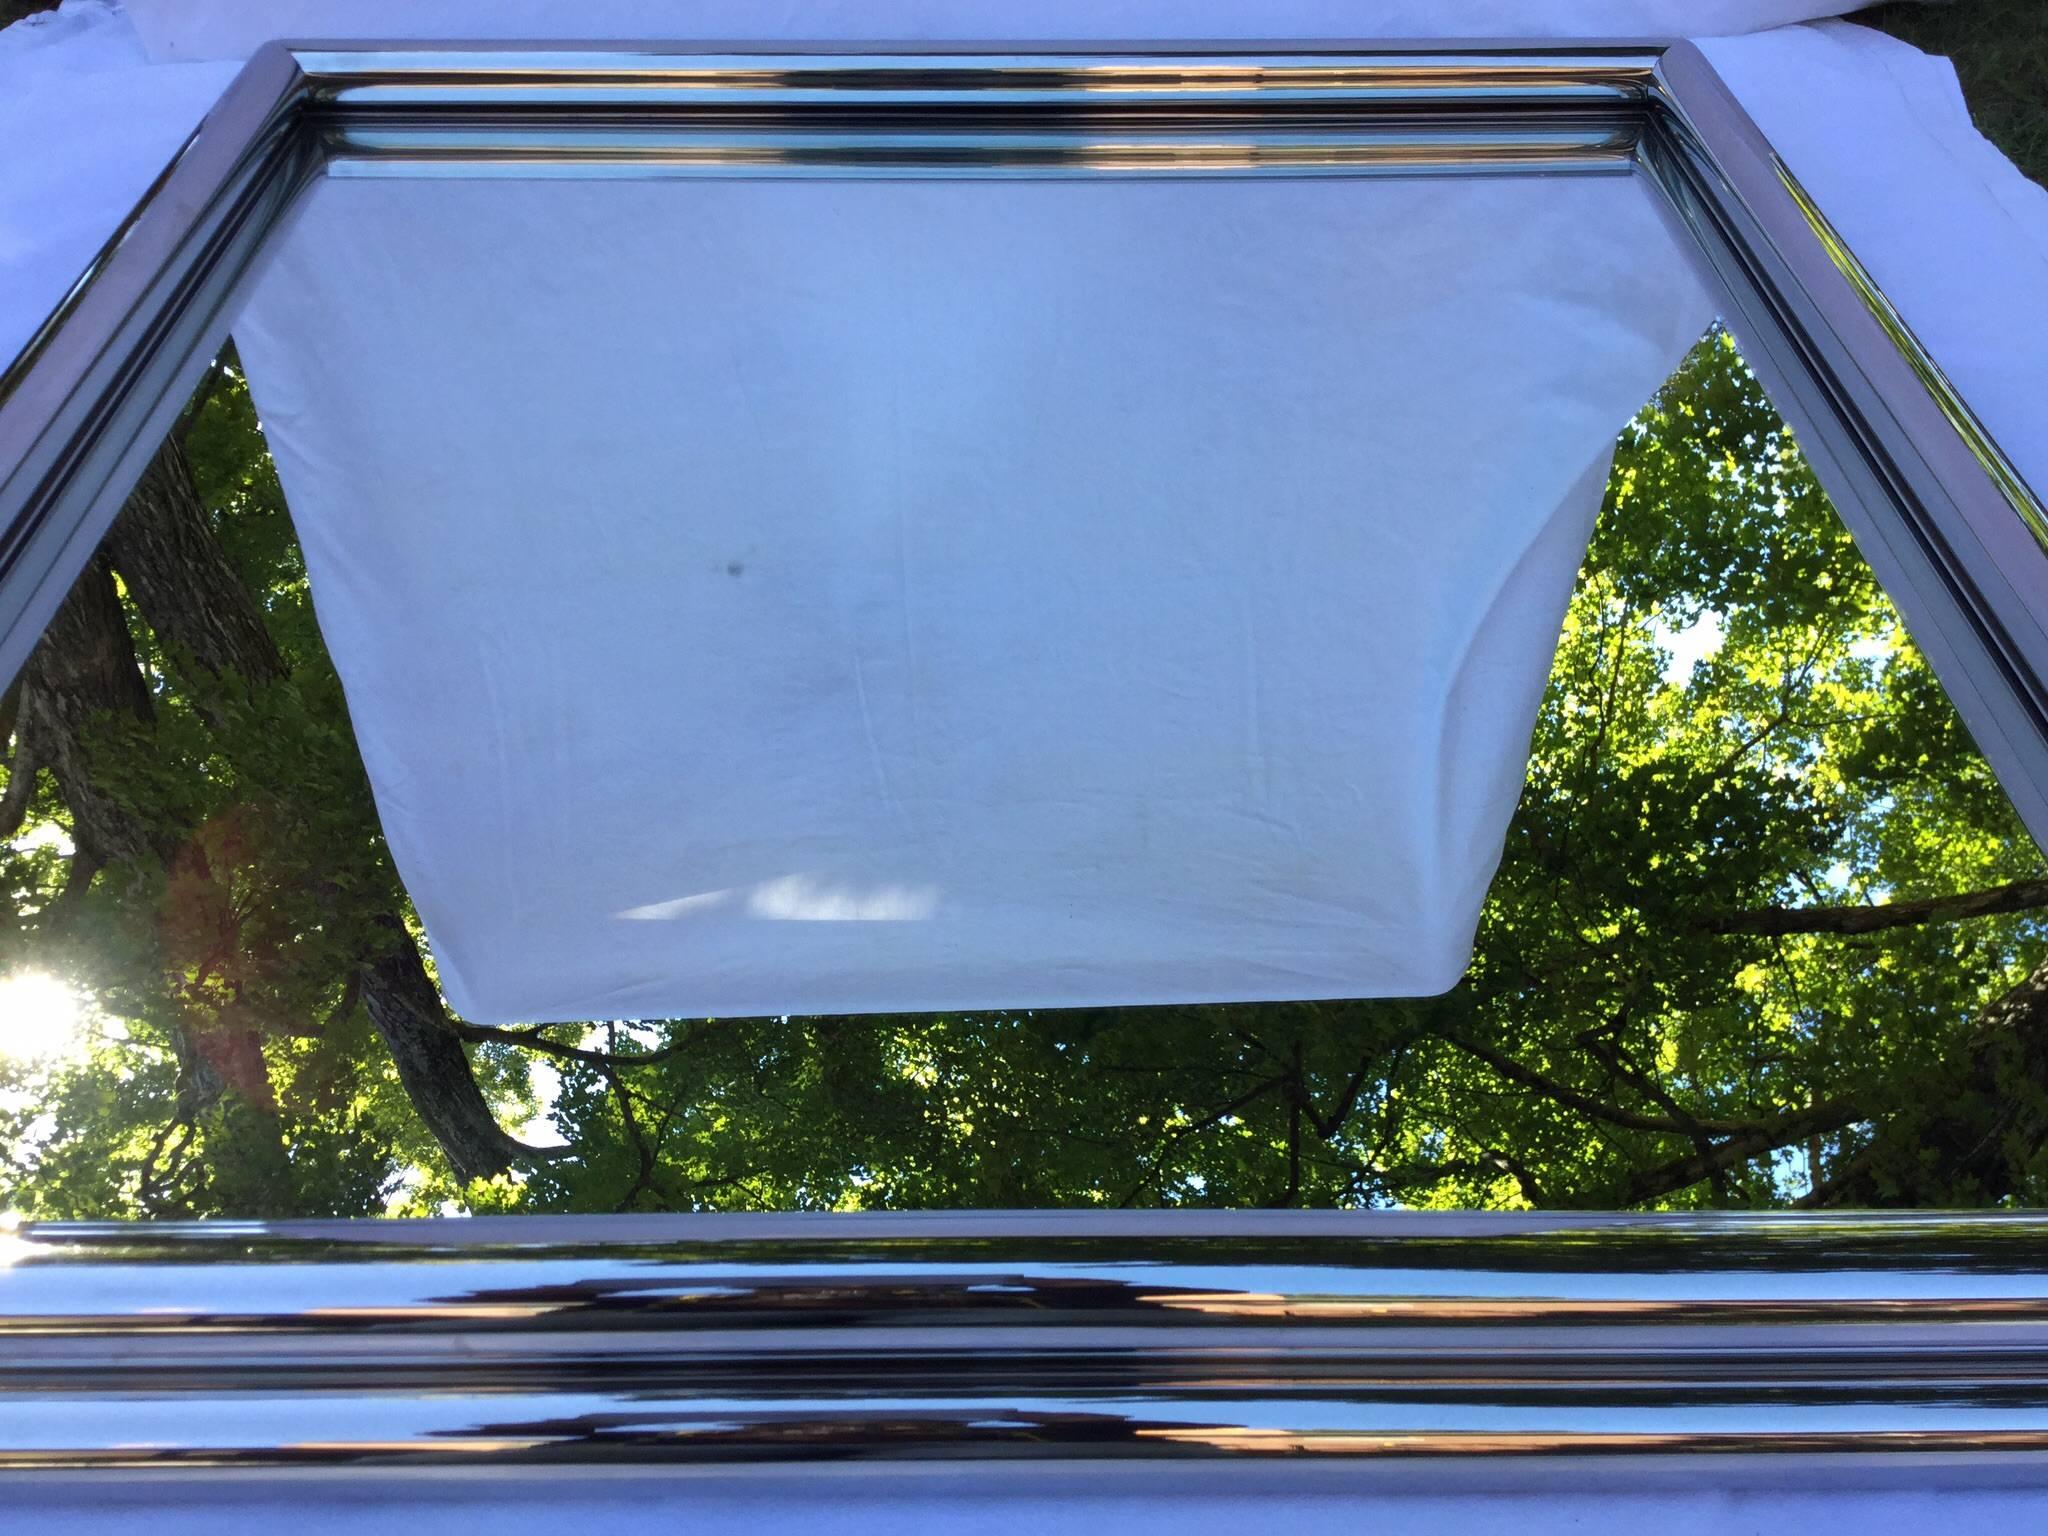 Polished Stainless Steel Radiator Wall Mirror In Excellent Condition For Sale In Canaan, CT